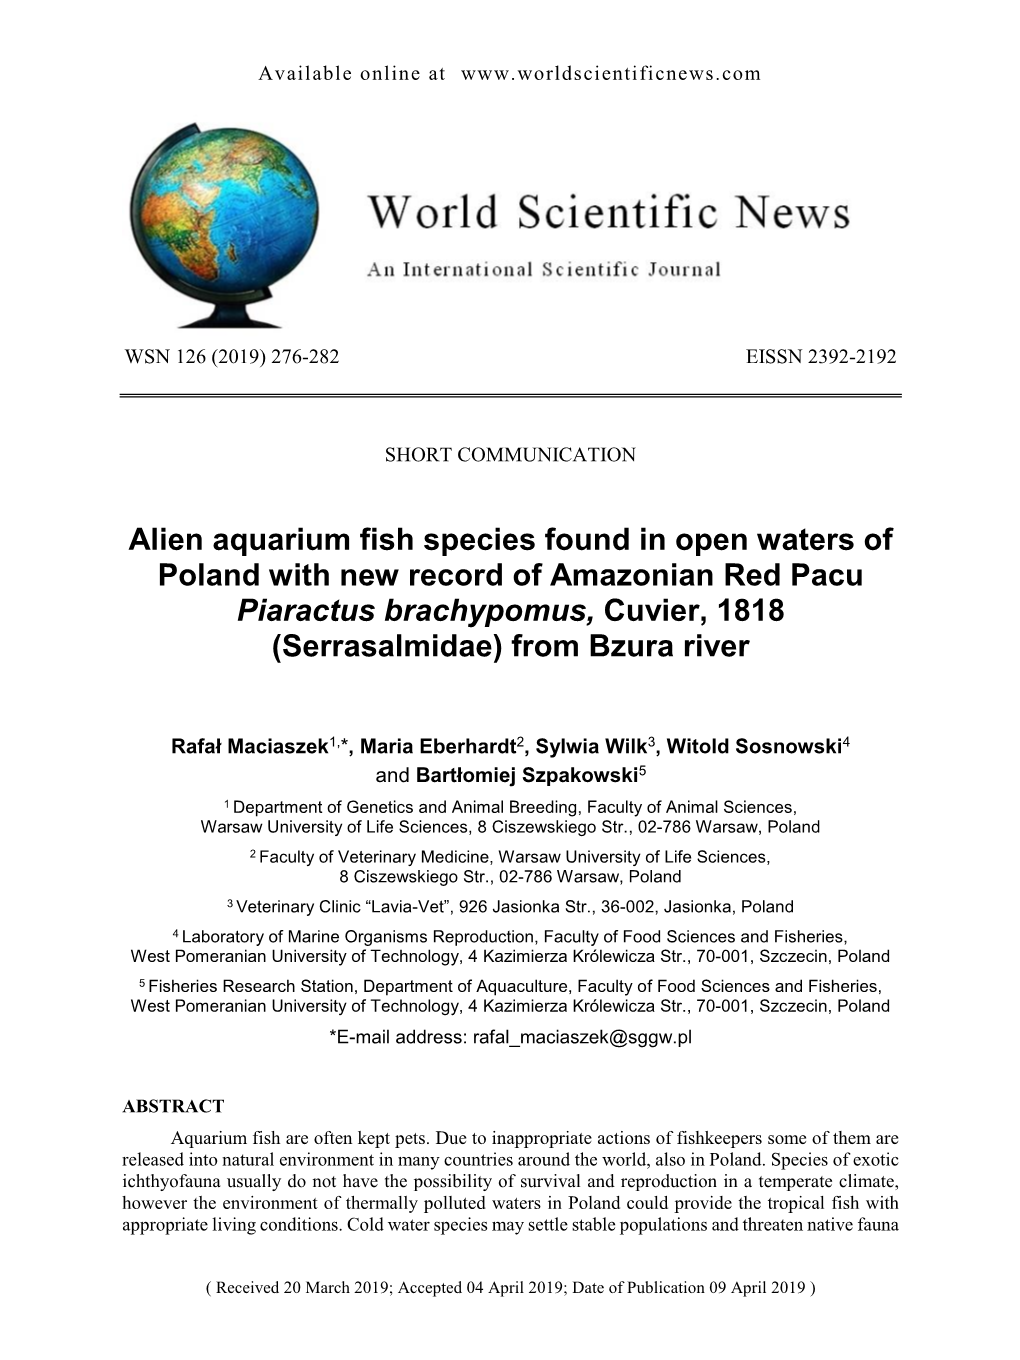 Alien Aquarium Fish Species Found in Open Waters of Poland with New Record of Amazonian Red Pacu Piaractus Brachypomus, Cuvier, 1818 (Serrasalmidae) from Bzura River